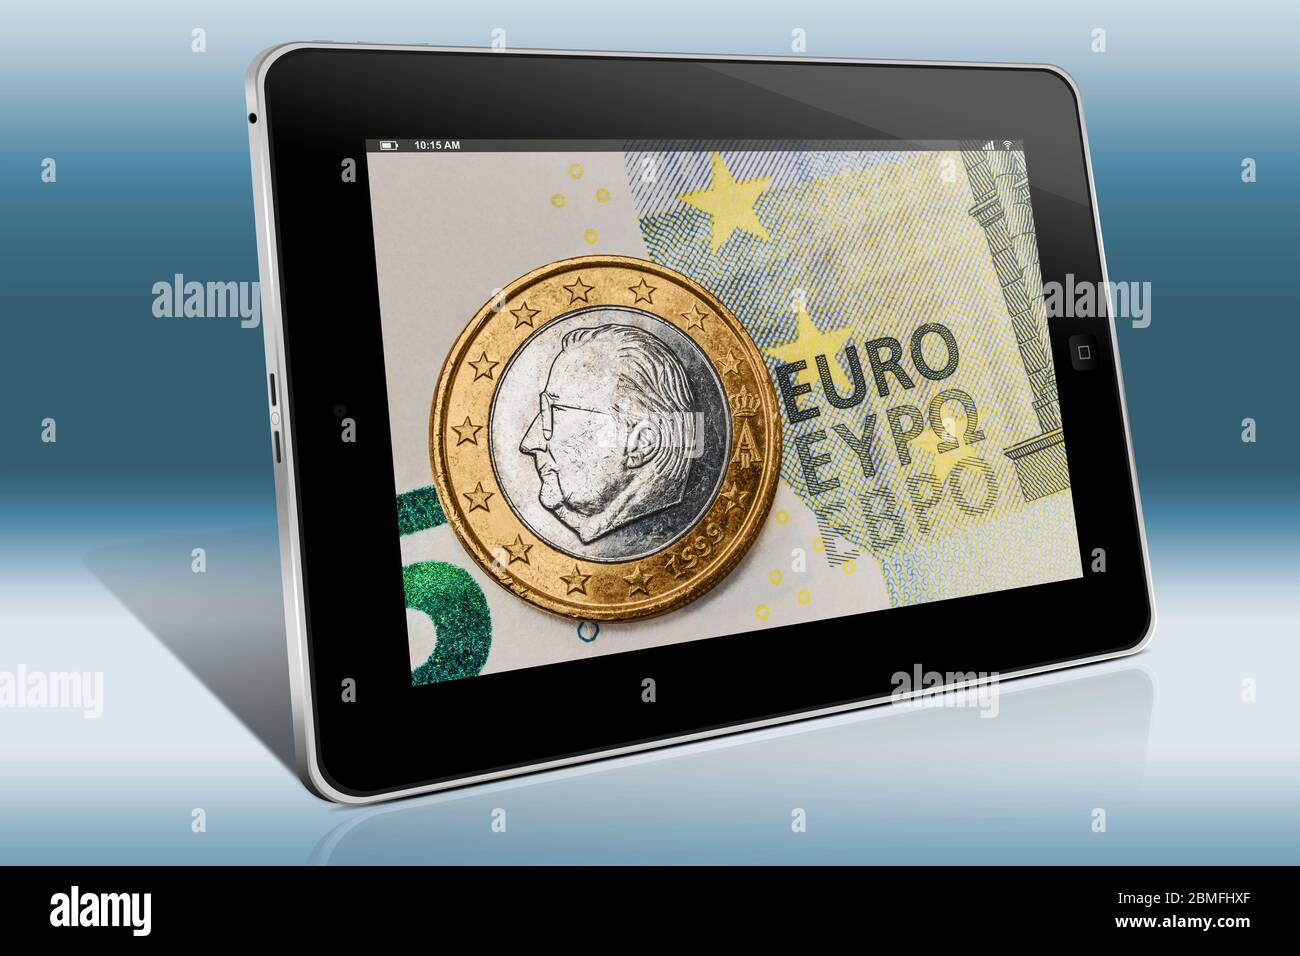 a 1 euro coin from Belgium on a 5 euro banknote, view on a Tablet PC Stock Photo